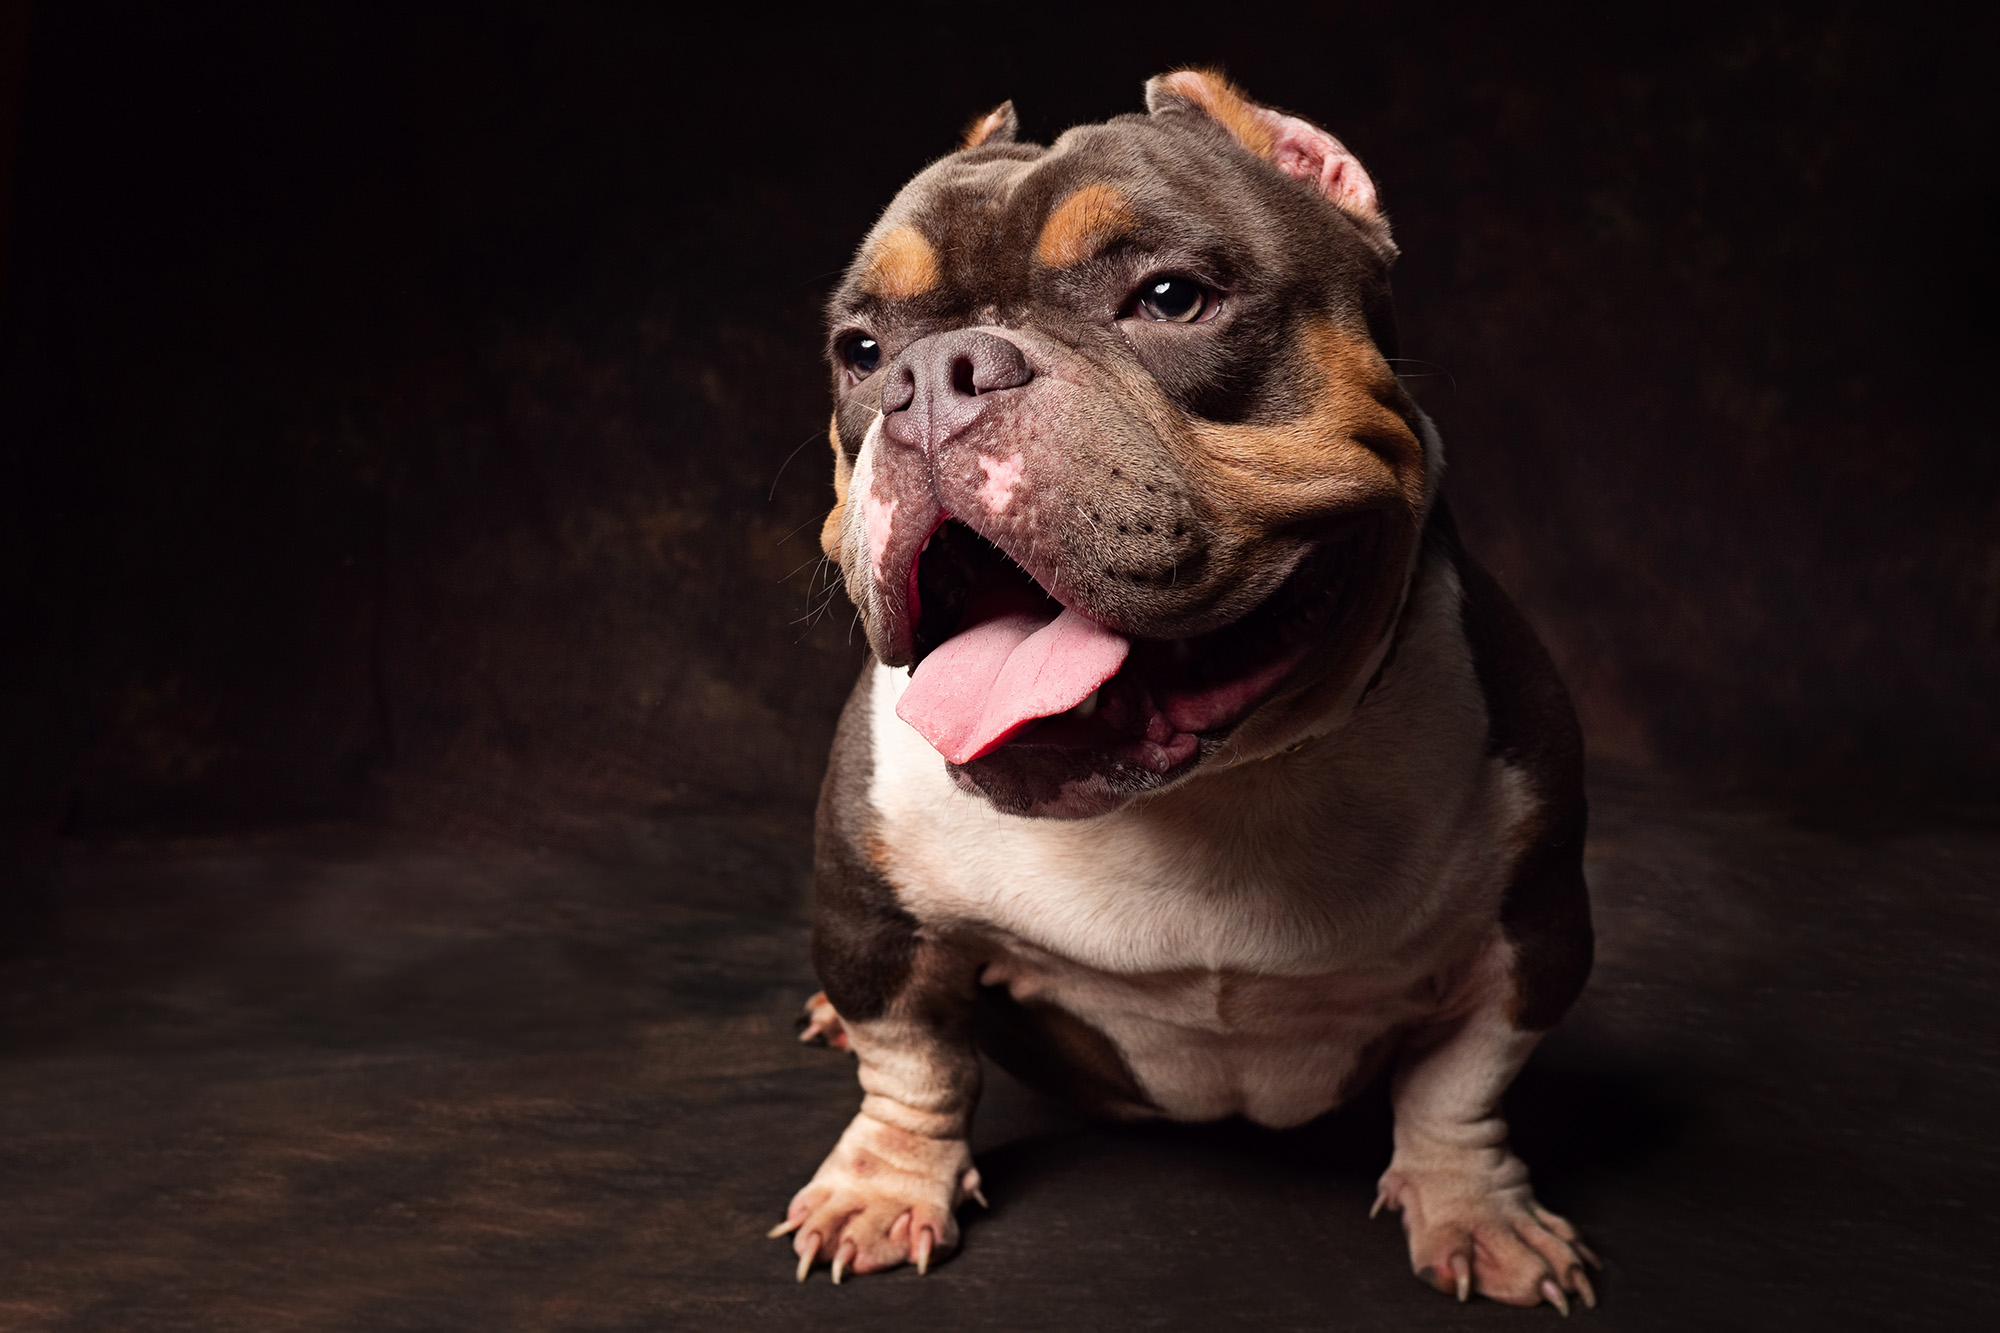 American Bully dogs may be trendy but the procedure behind their appearance has some animal rights activists worried.